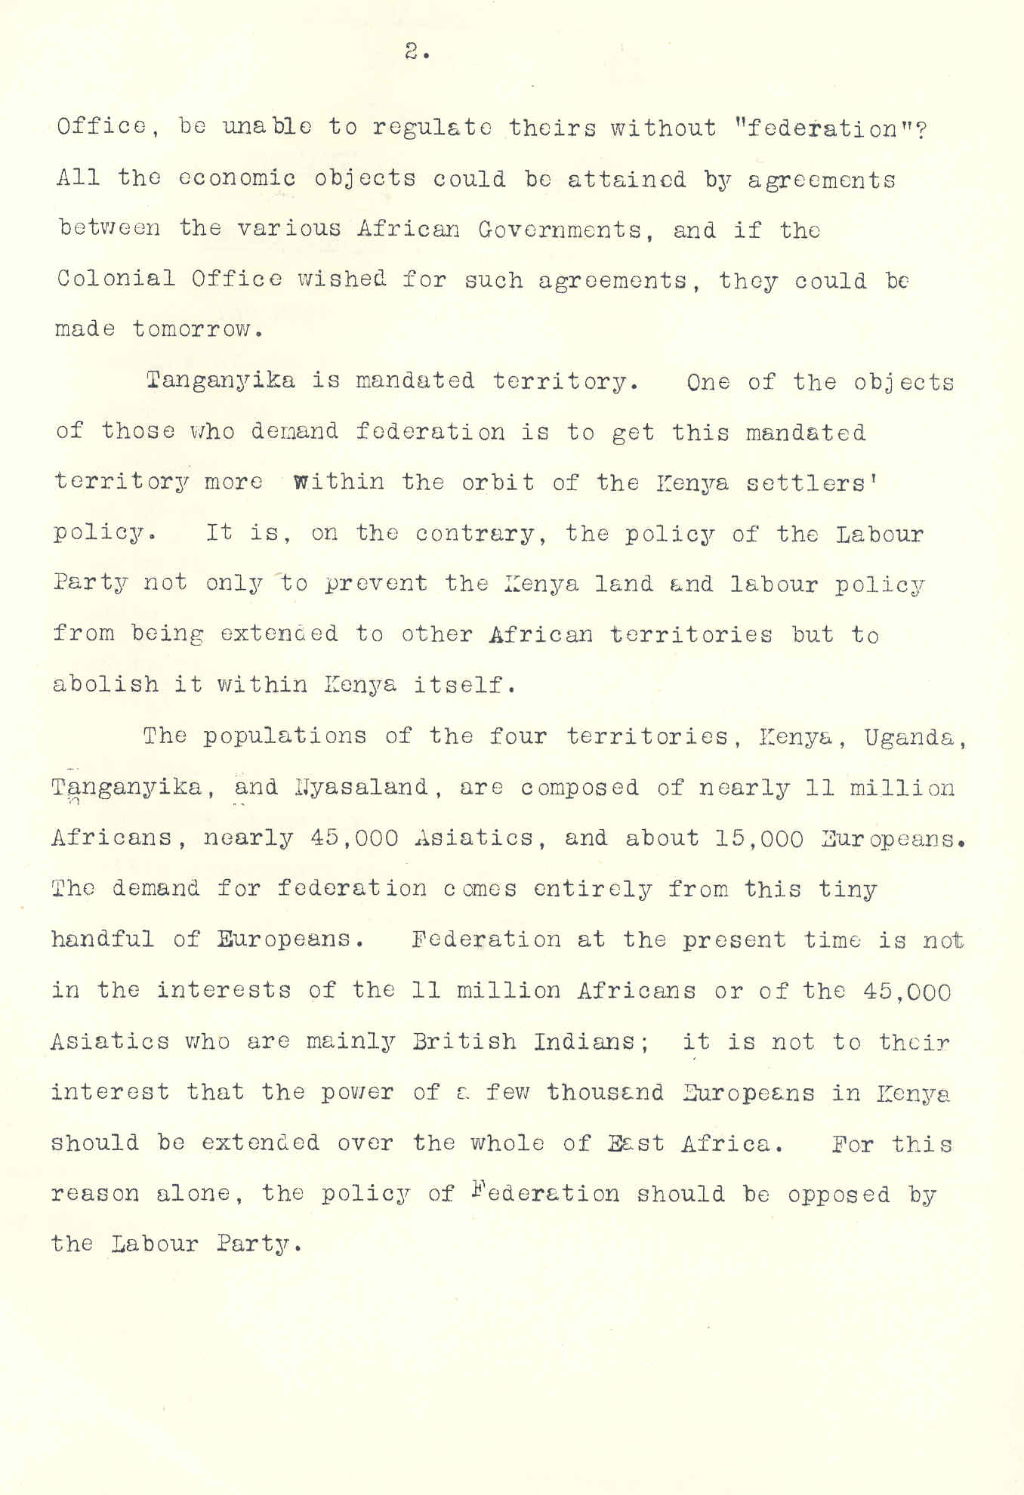 Memorandum on proposals for a Federation of East Africa, 1927